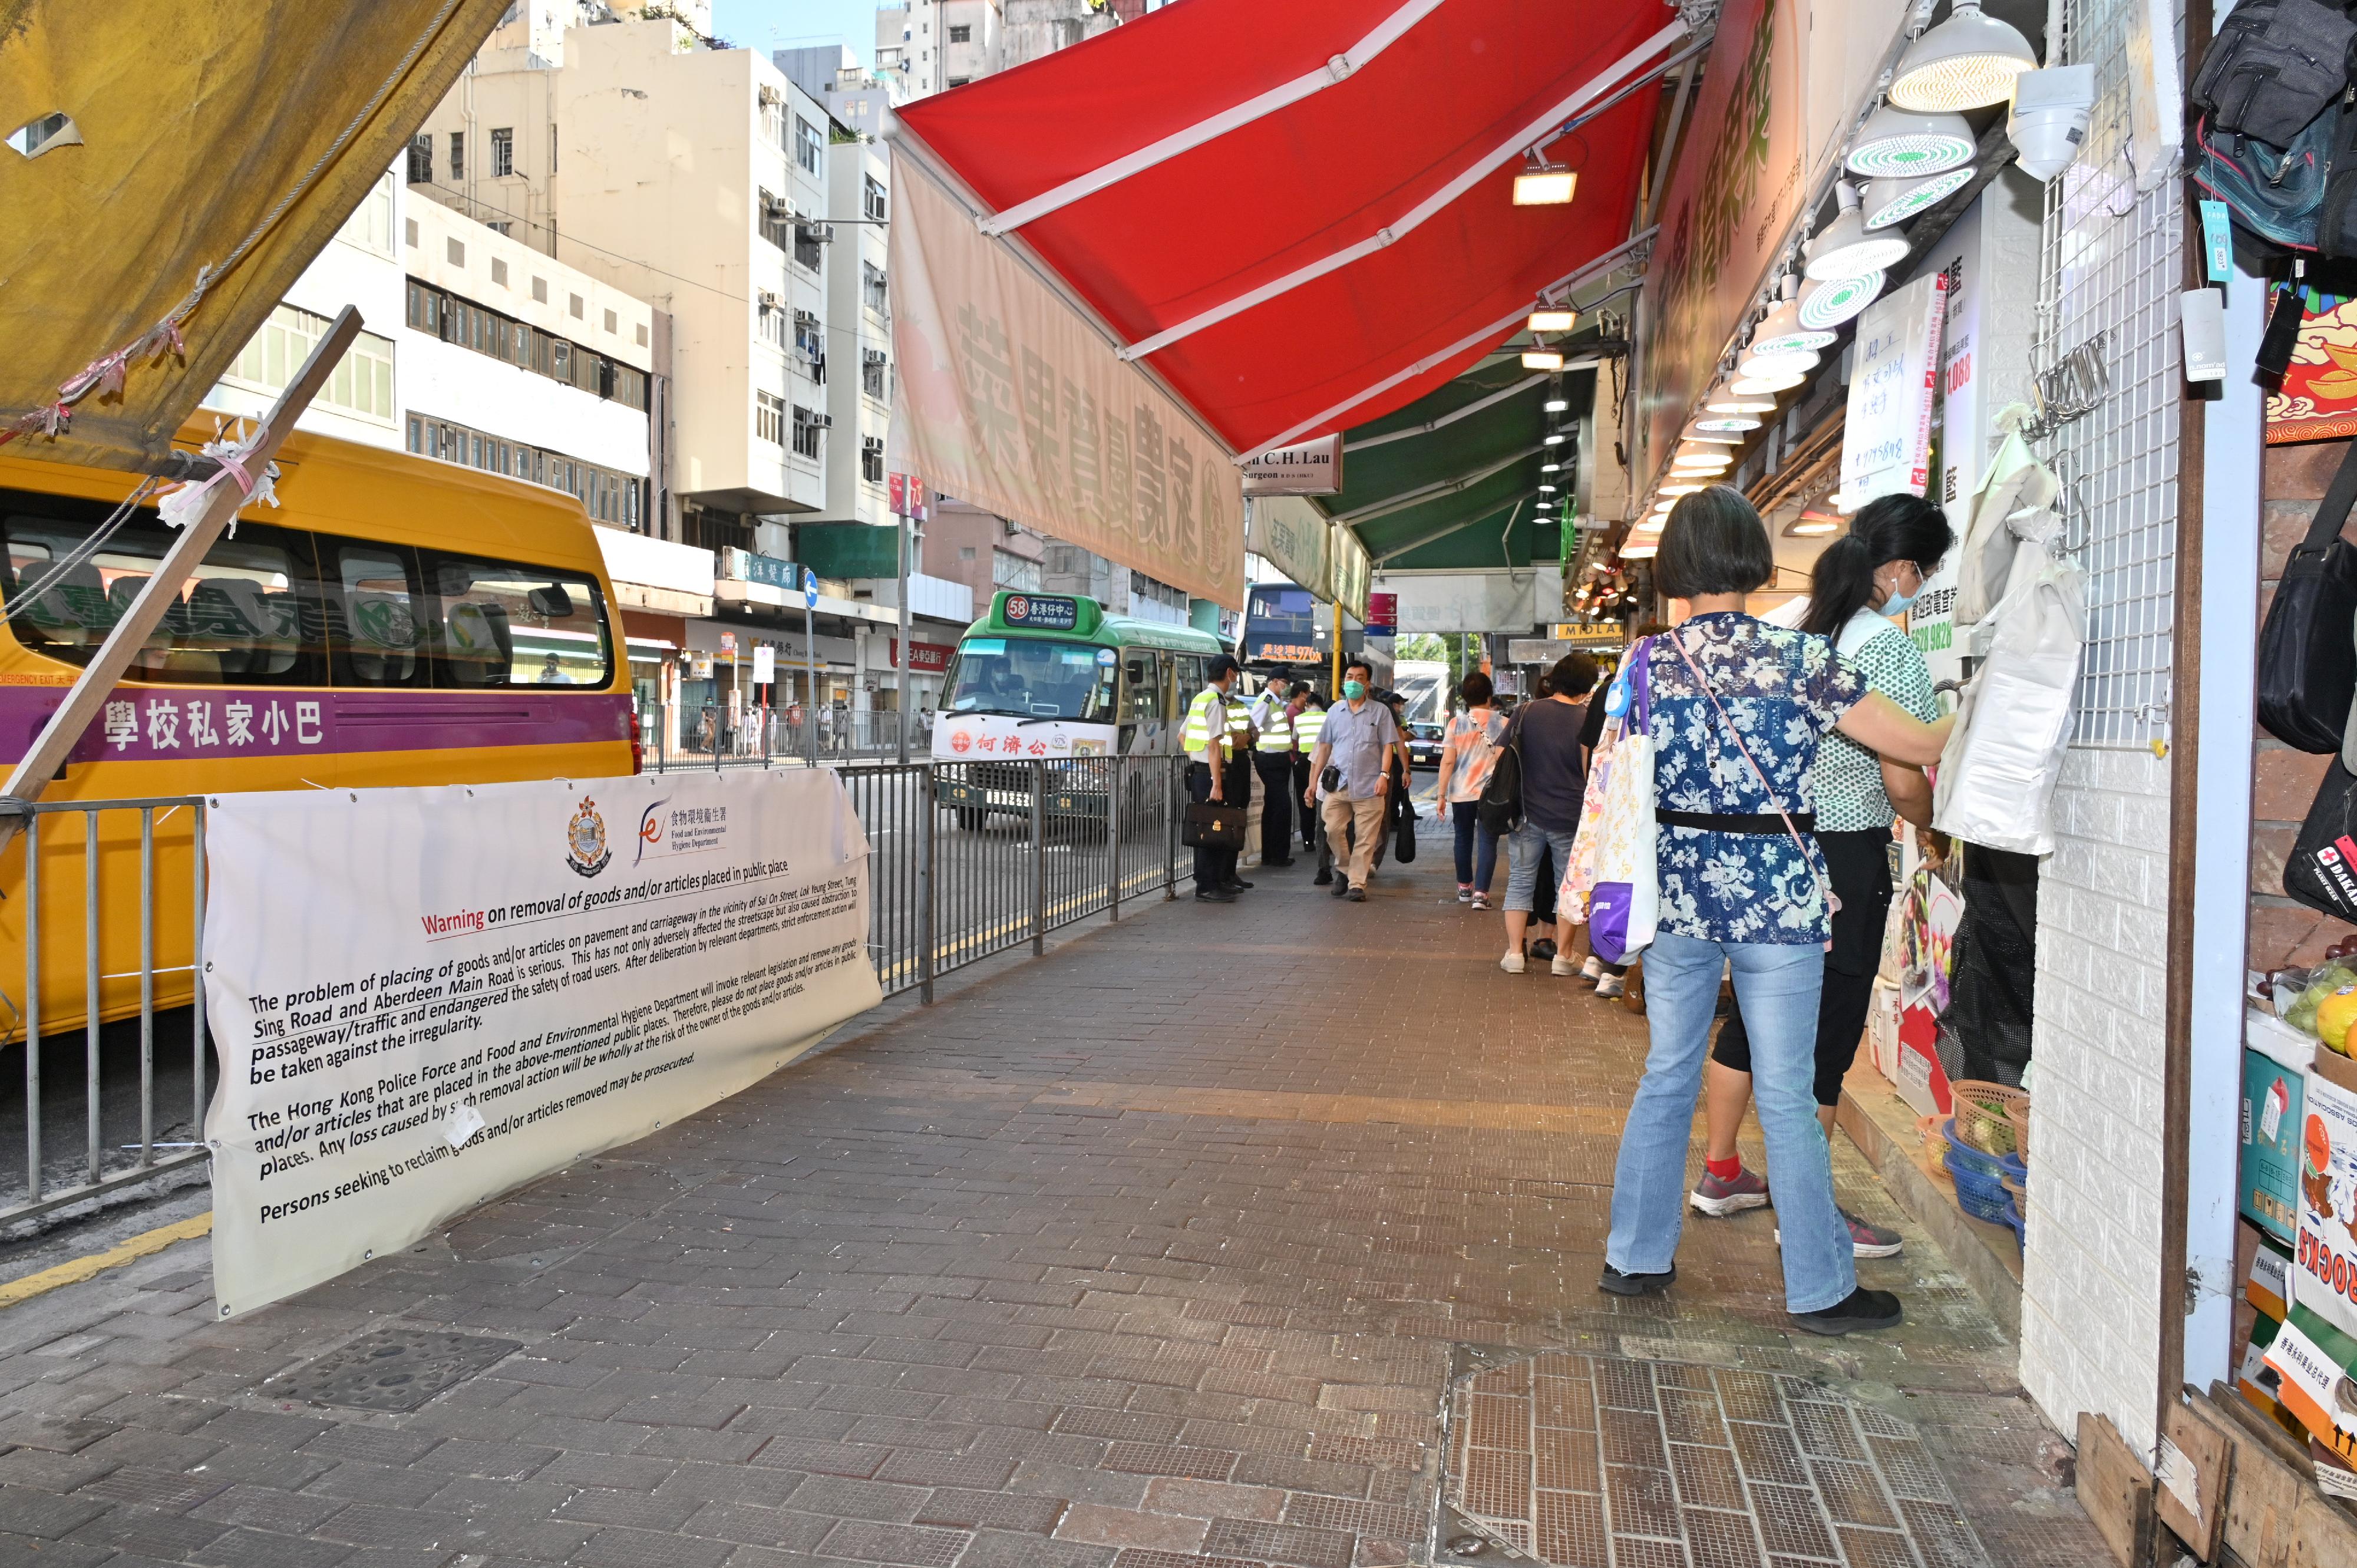 A spokesman for the Food and Environmental Hygiene Department (FEHD) said today (October 17) that the FEHD and the Hong Kong Police Force have conducted a series of stringent enforcement actions against illegal shop front extension activities in various districts since October 3. Photo shows the condition of a street in Southern District after a joint operation.